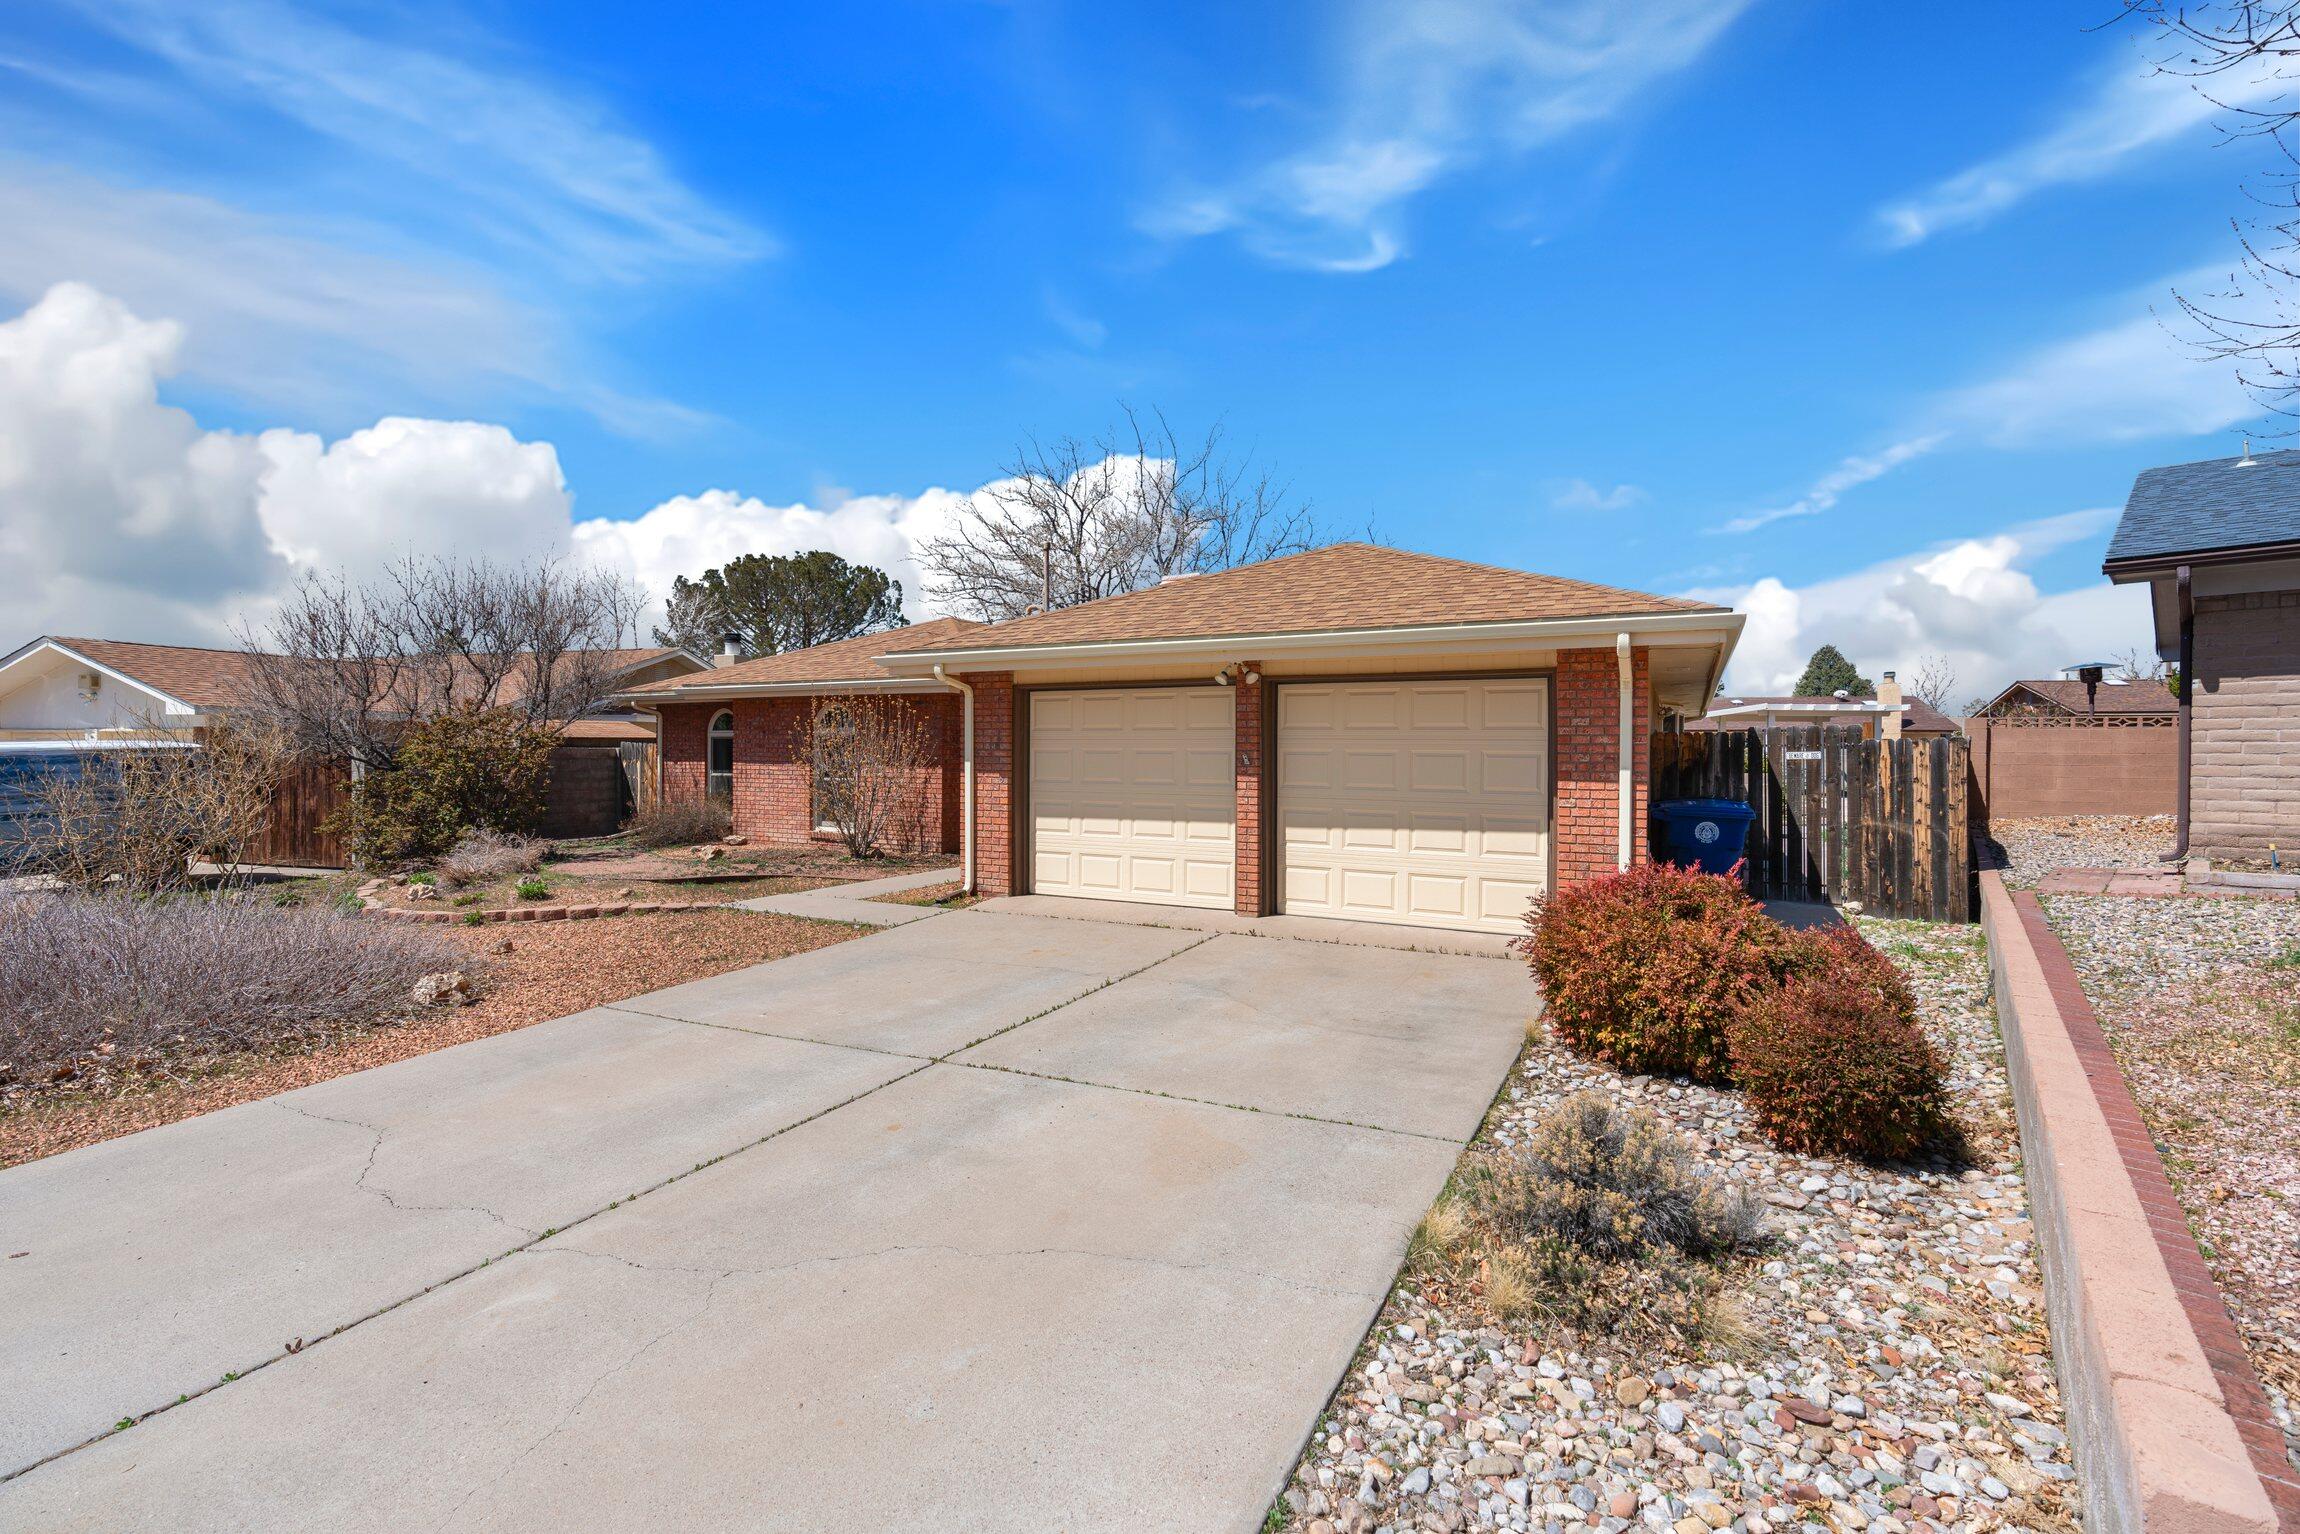 7309 Valley Forge Road NE, Albuquerque, New Mexico 87109, 3 Bedrooms Bedrooms, ,2 BathroomsBathrooms,Residential,For Sale,7309 Valley Forge Road NE,1059617